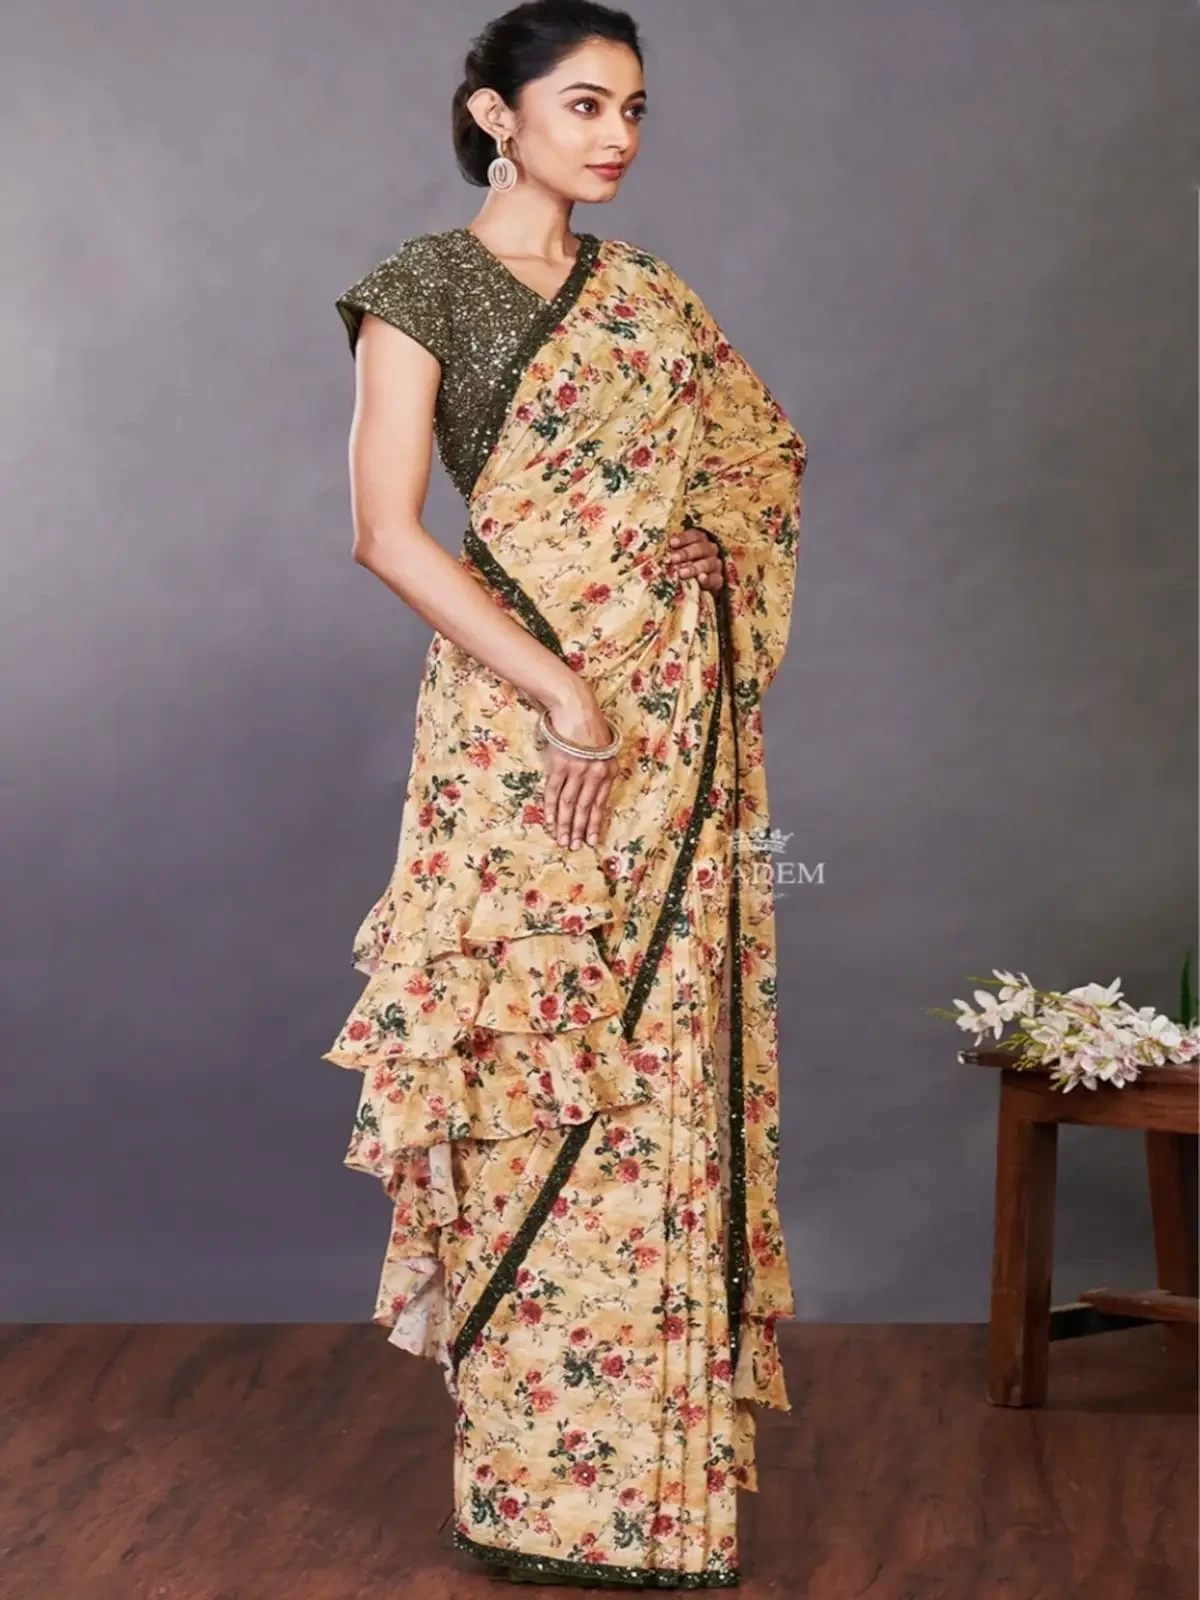 Royal Yellow Georgette Saree With Floral Prints On The Body And Sequins Design Border